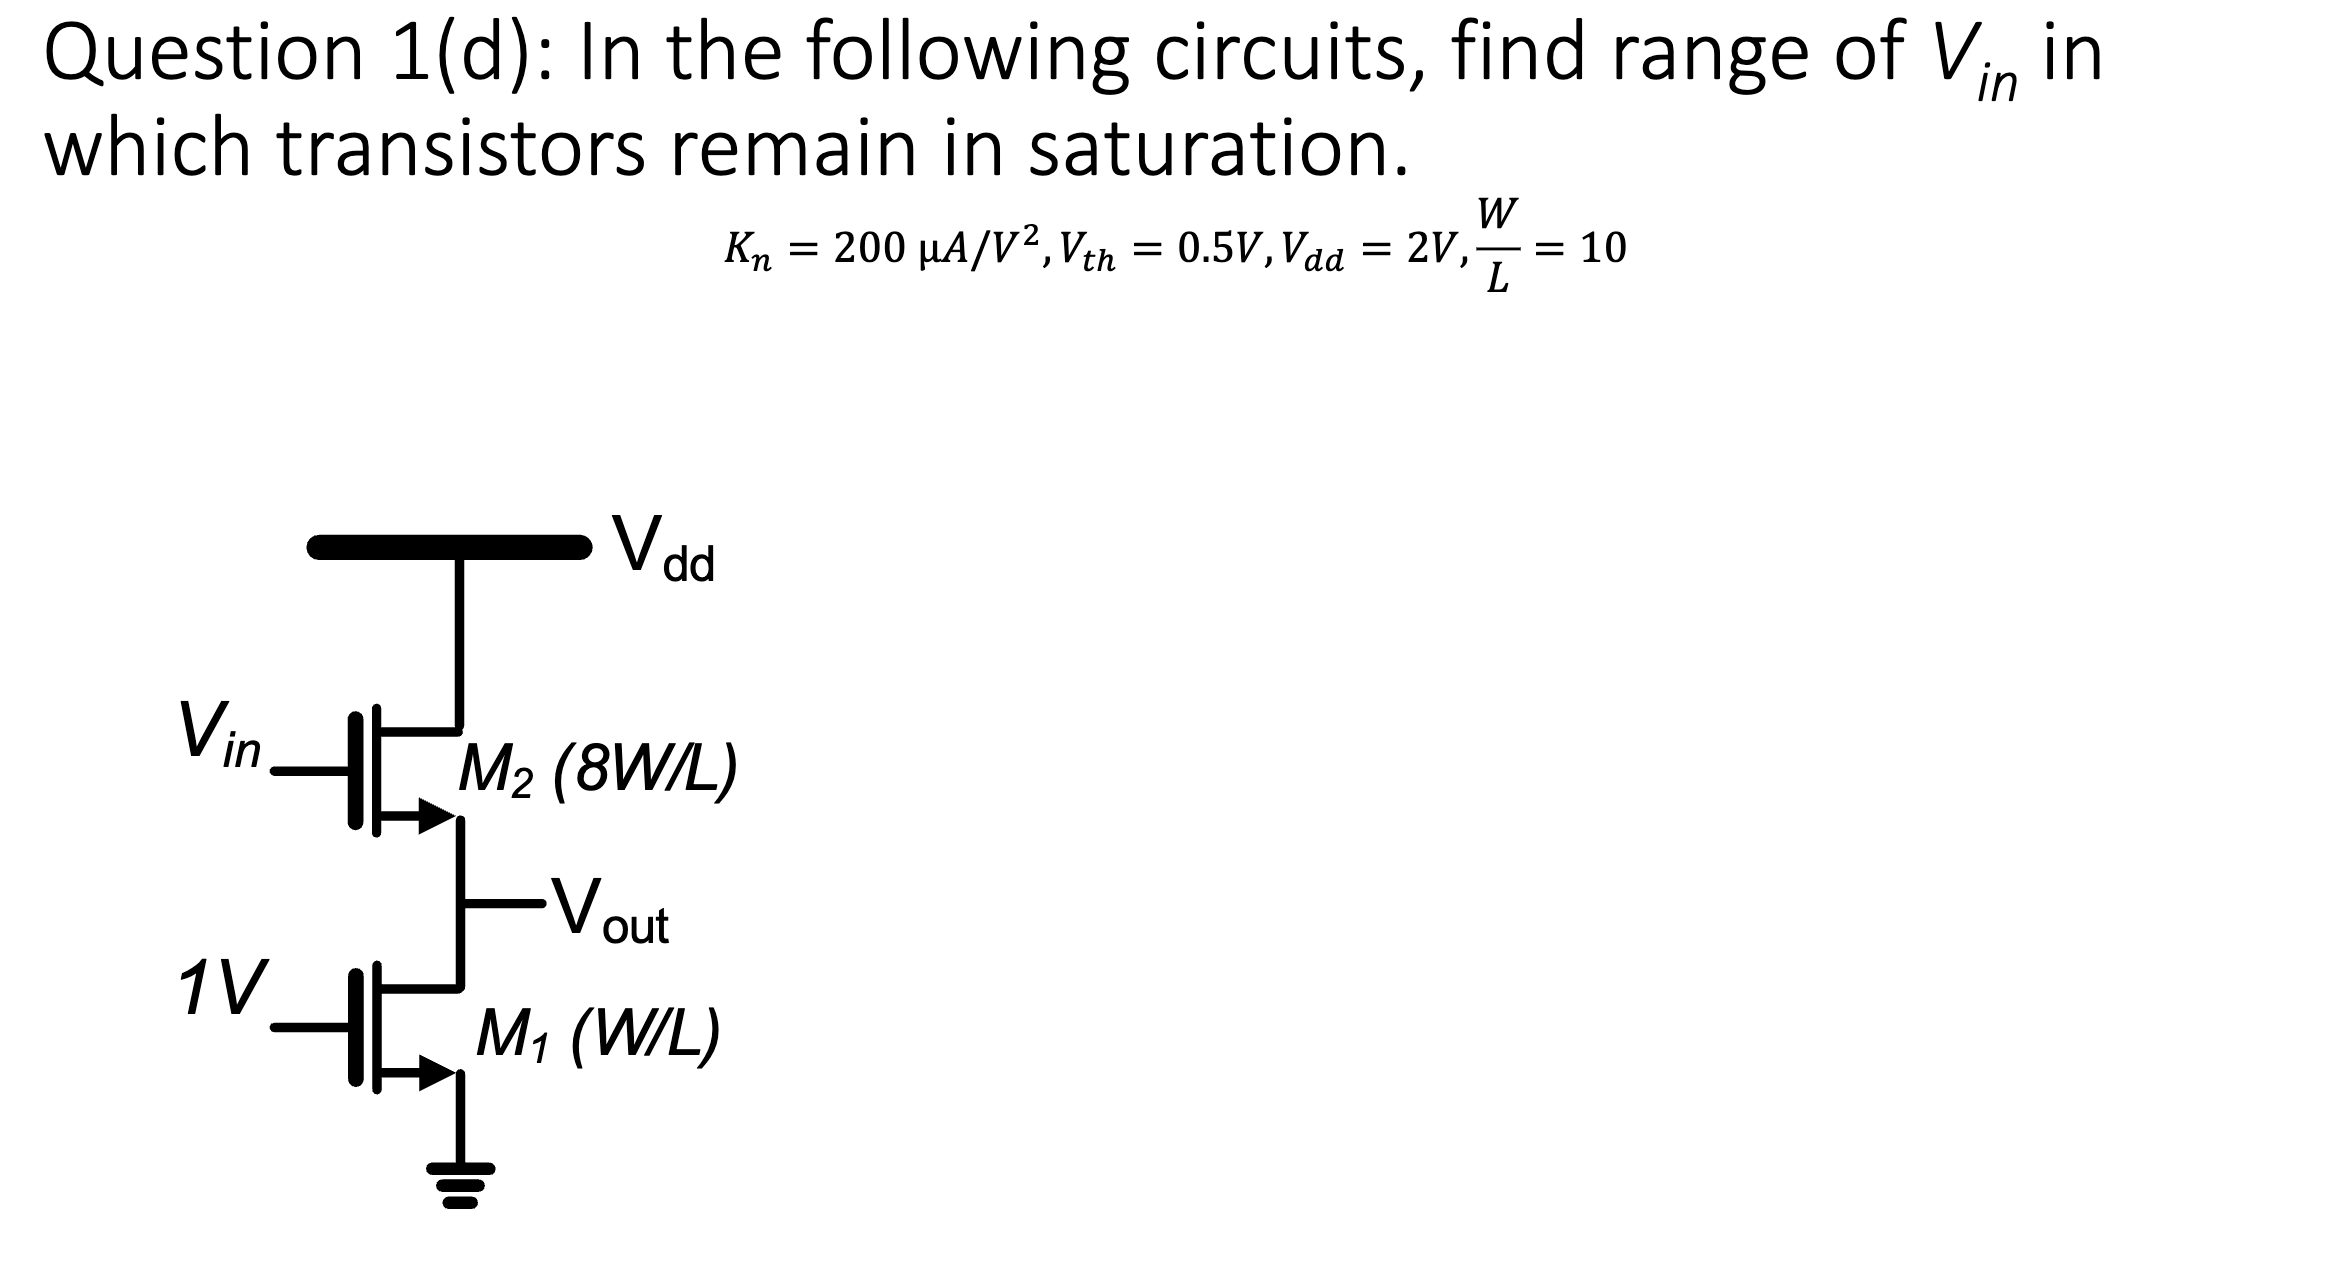 Question 1( d): In the following circuits, find range of Vin  in which transistors remain in saturation. Kn = 200 uA/V2, Vth = 0.5 V, Vdd = 2 V, W/L = 10